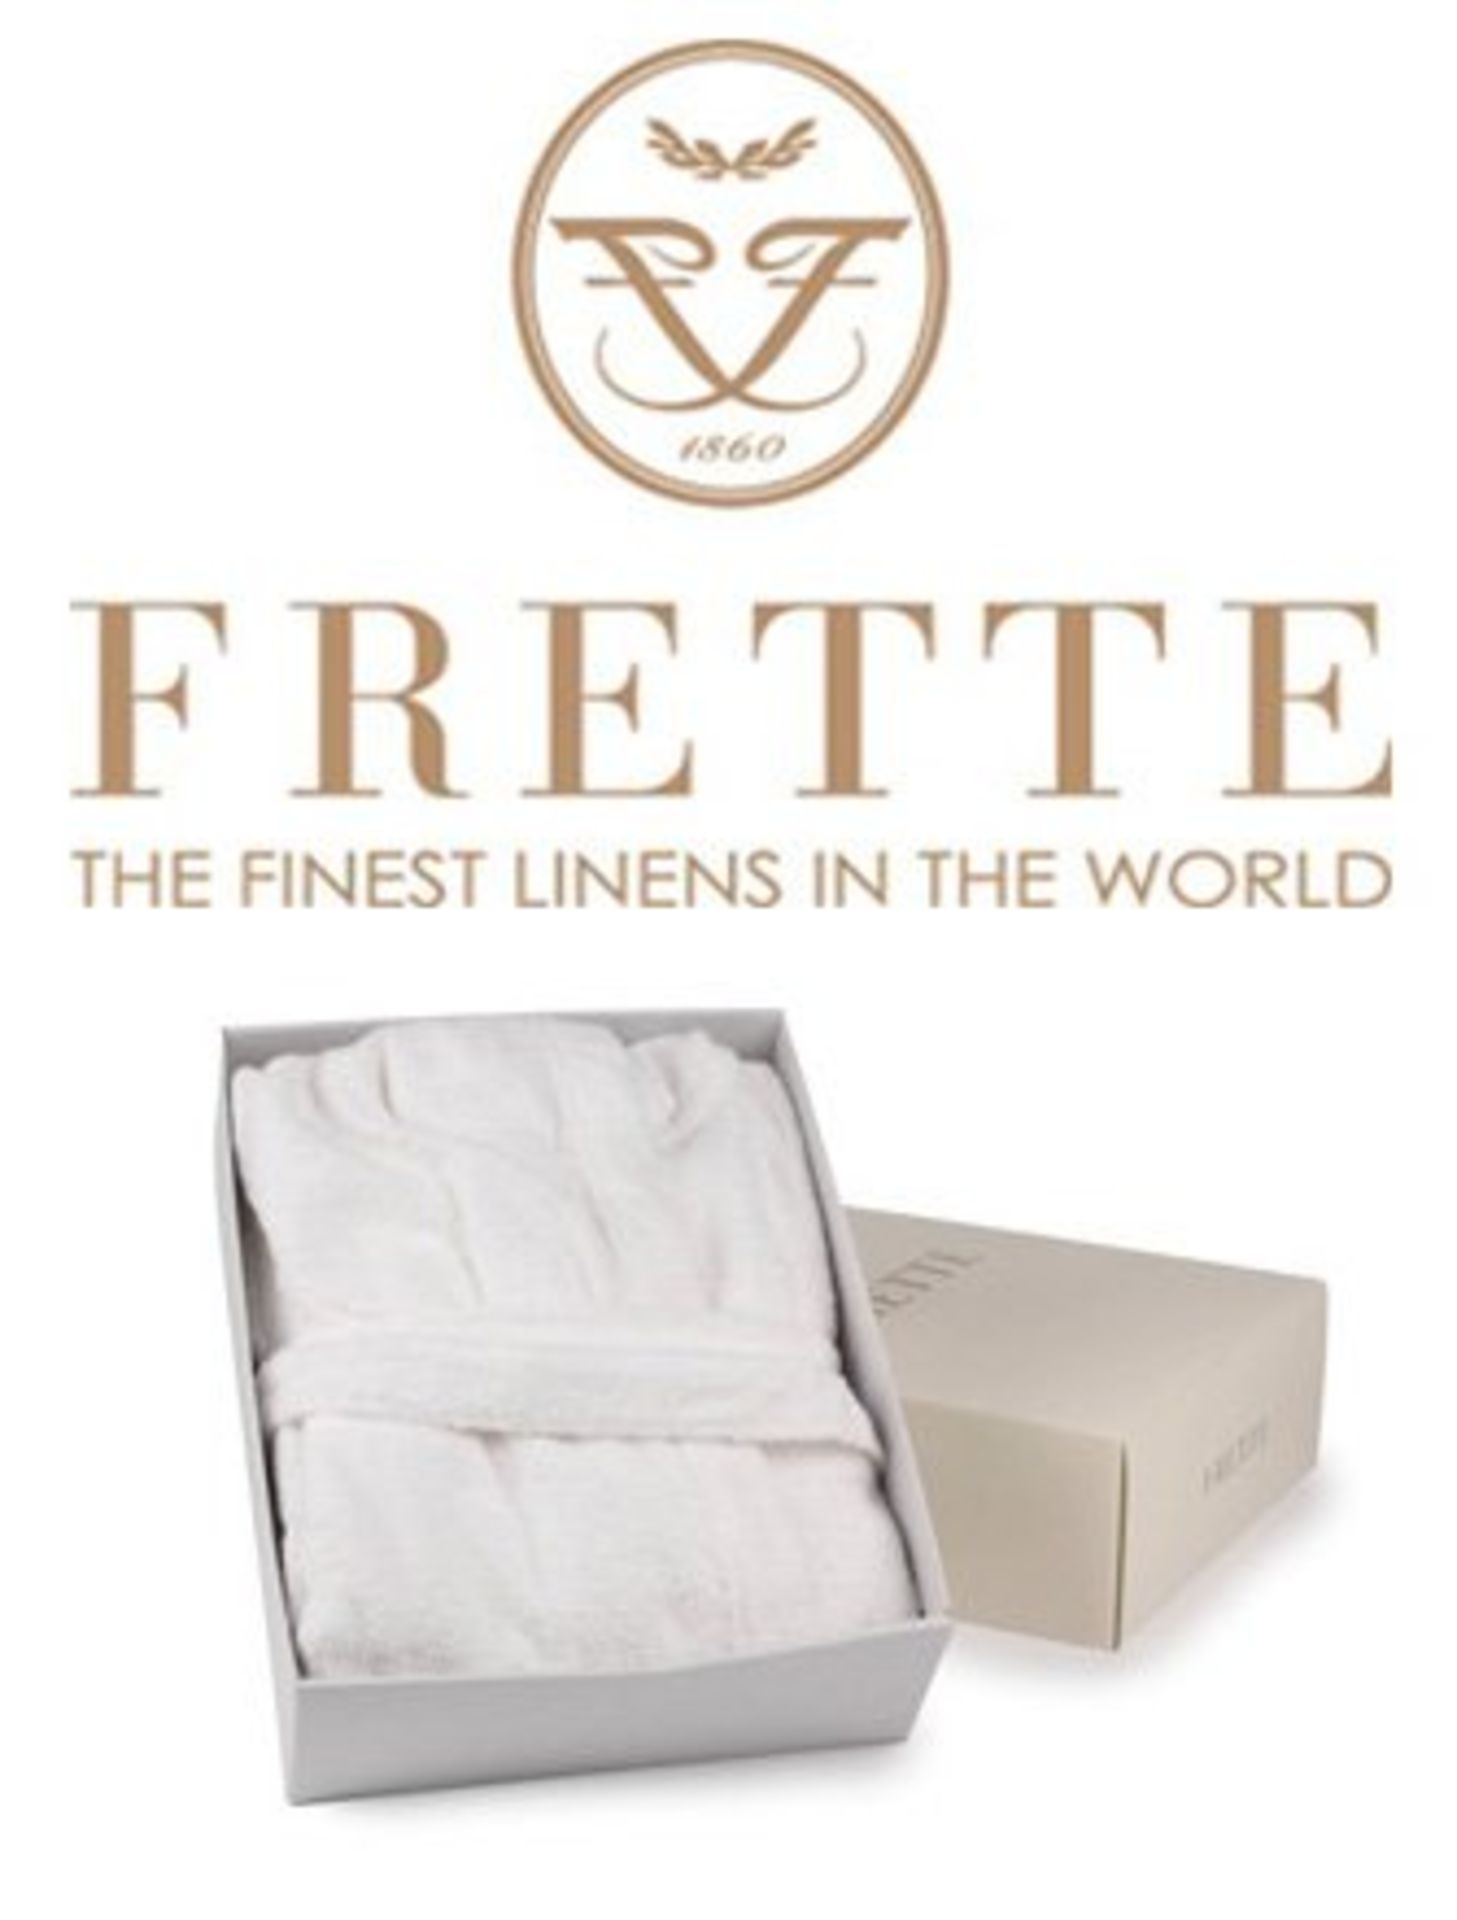 V Brand New Frette Luxury Italian 100% Open Ended High Quality Cotton White Bath Robe with Hood - Image 2 of 3